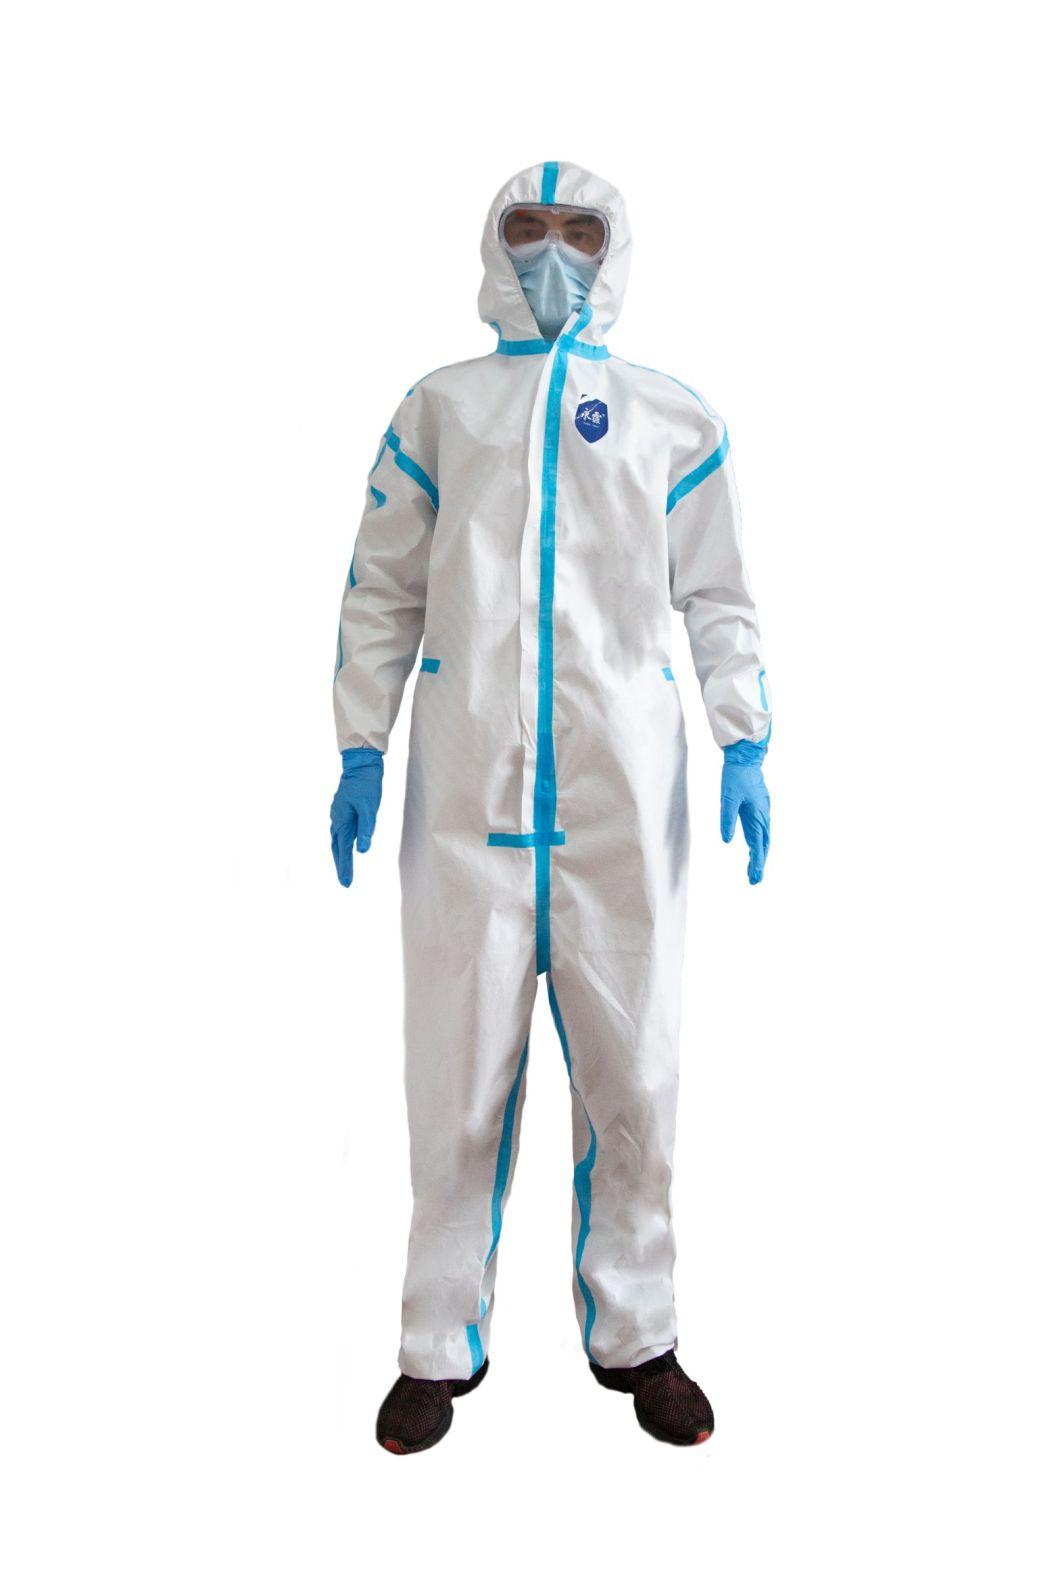 Factory Disposable Protective Gown (non-sterile) Safety Coverall Medical Protective Coverall